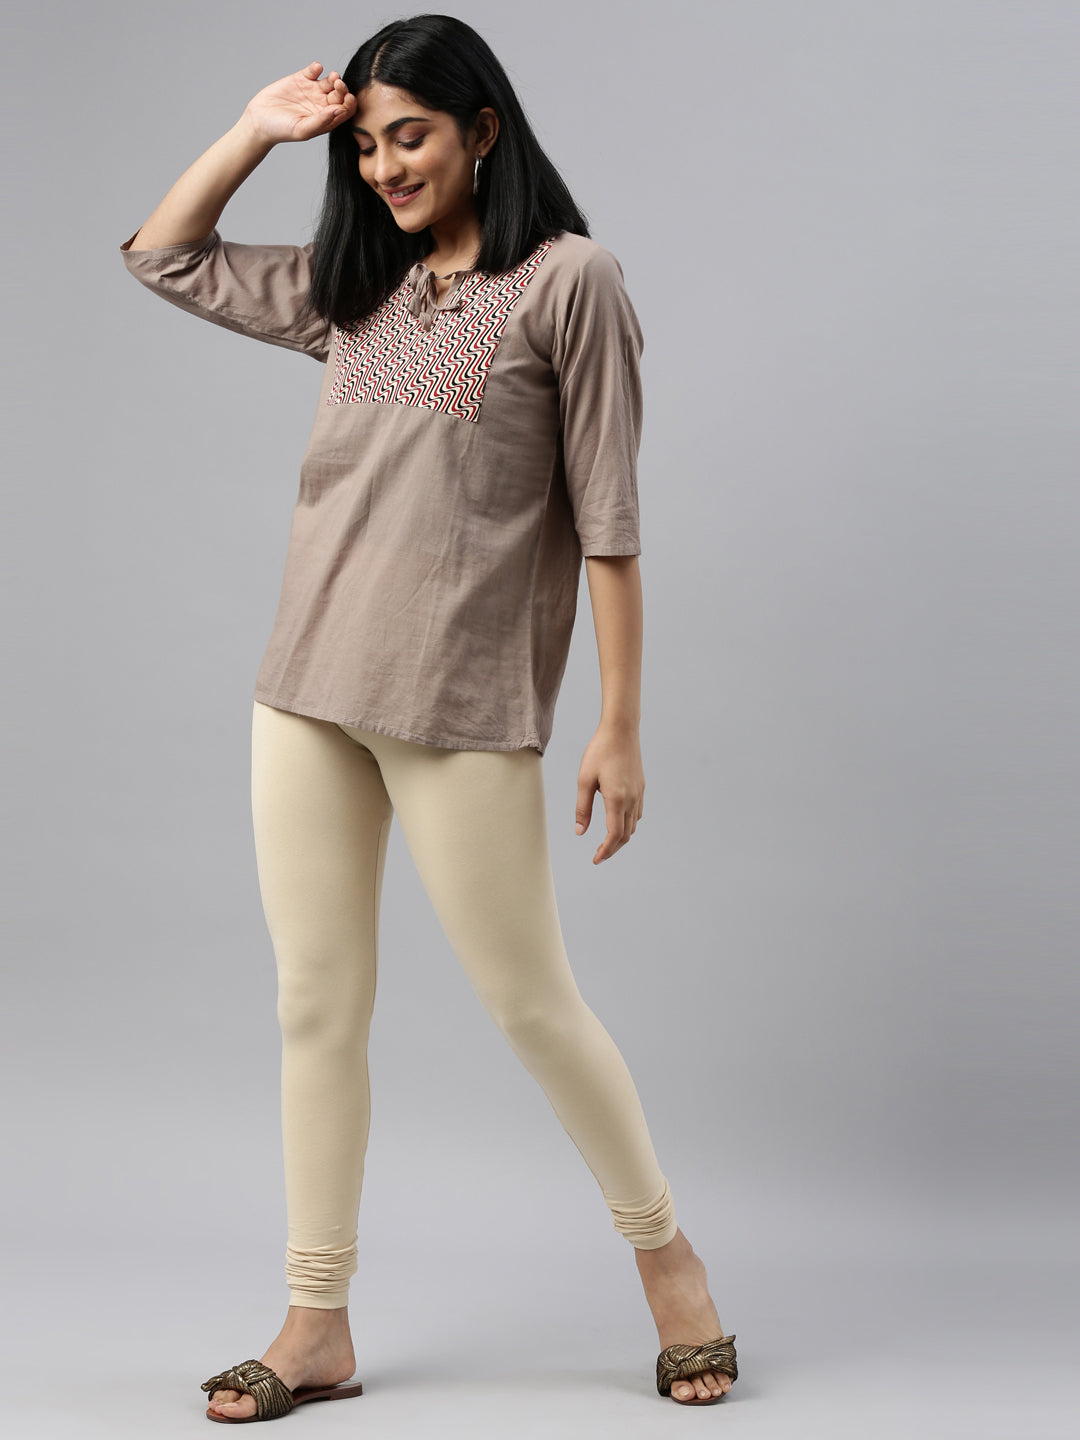 Buy Go Colors Women Cream Solid Stretch Leggings Online at Best